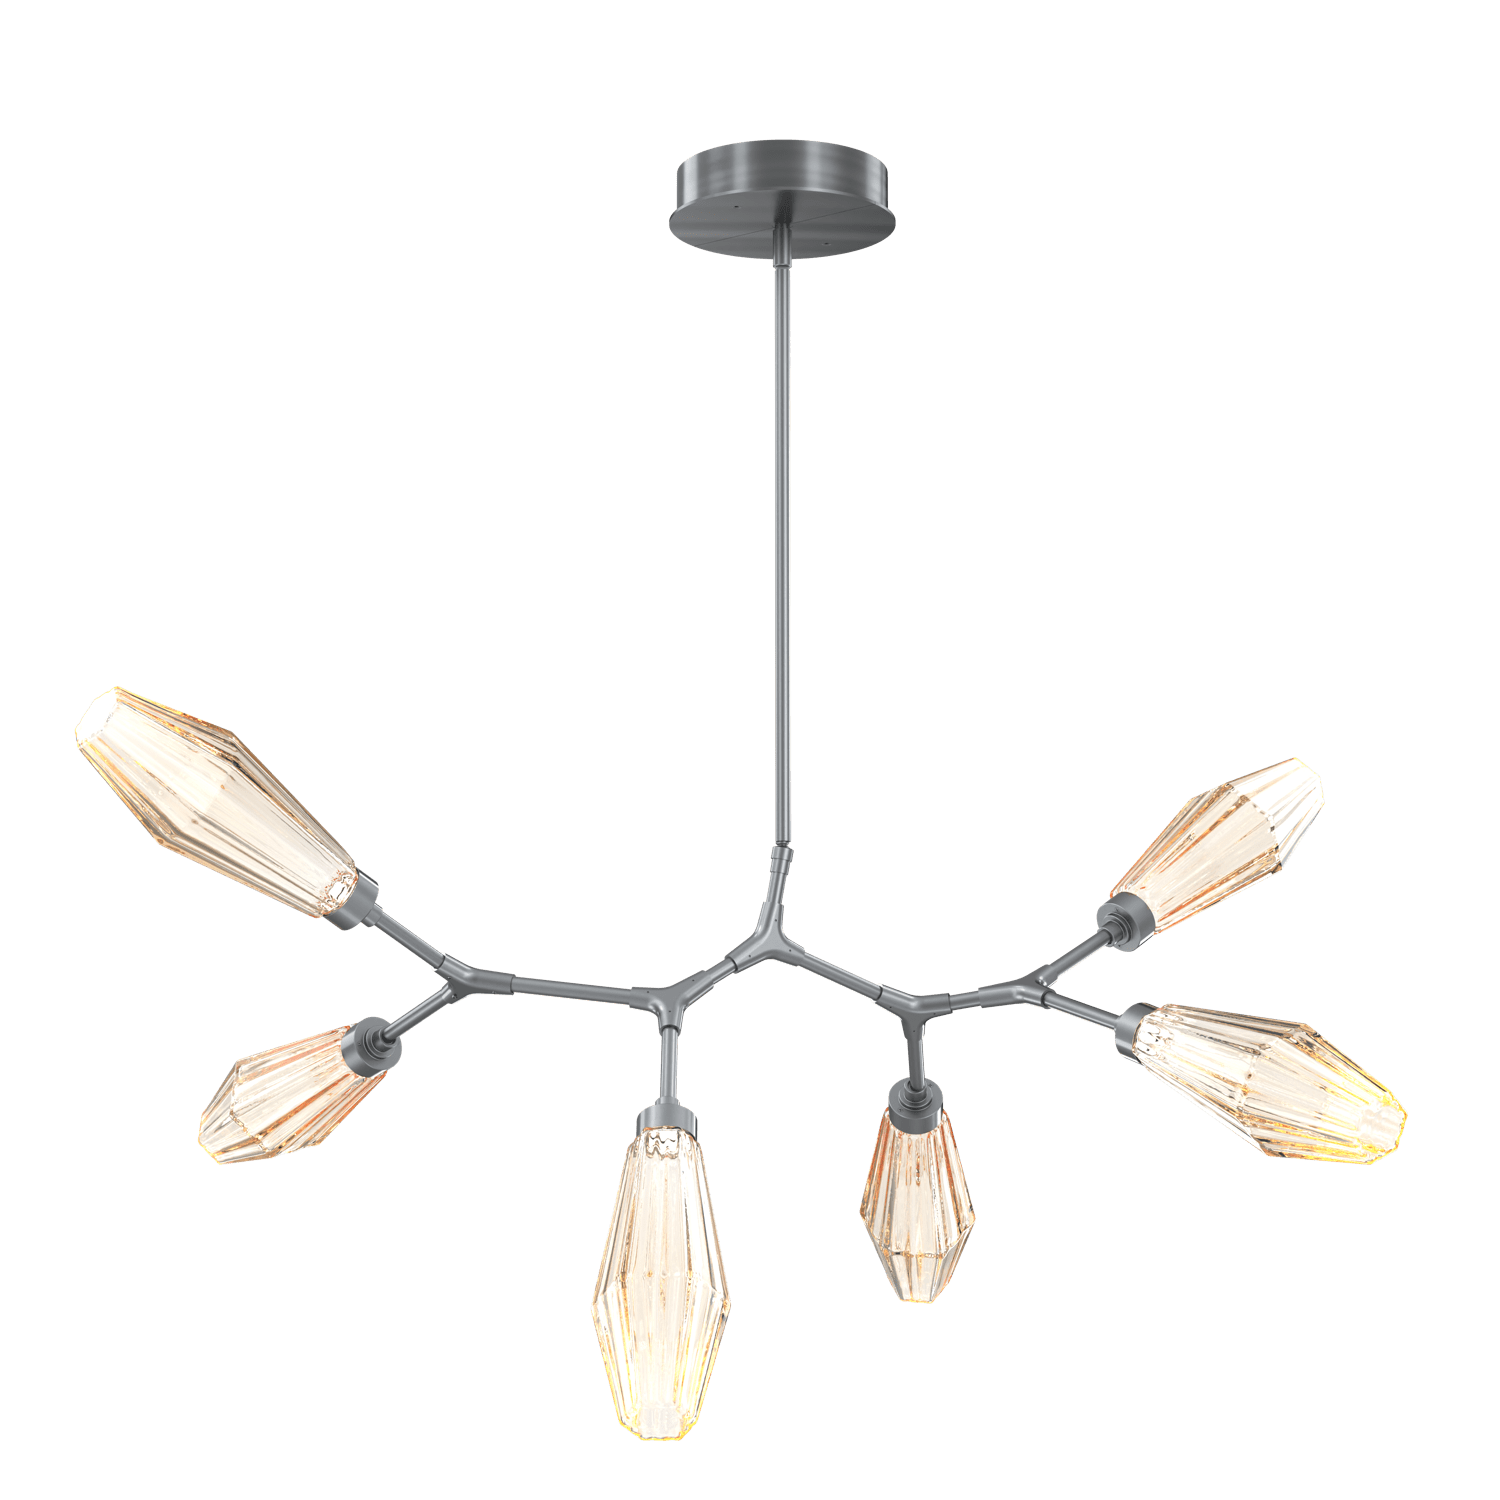 PLB0049-BA-GM-RA-Hammerton-Studio-Aalto-6-light-modern-branch-chandelier-with-gunmetal-finish-and-optic-ribbed-amber-glass-shades-and-LED-lamping